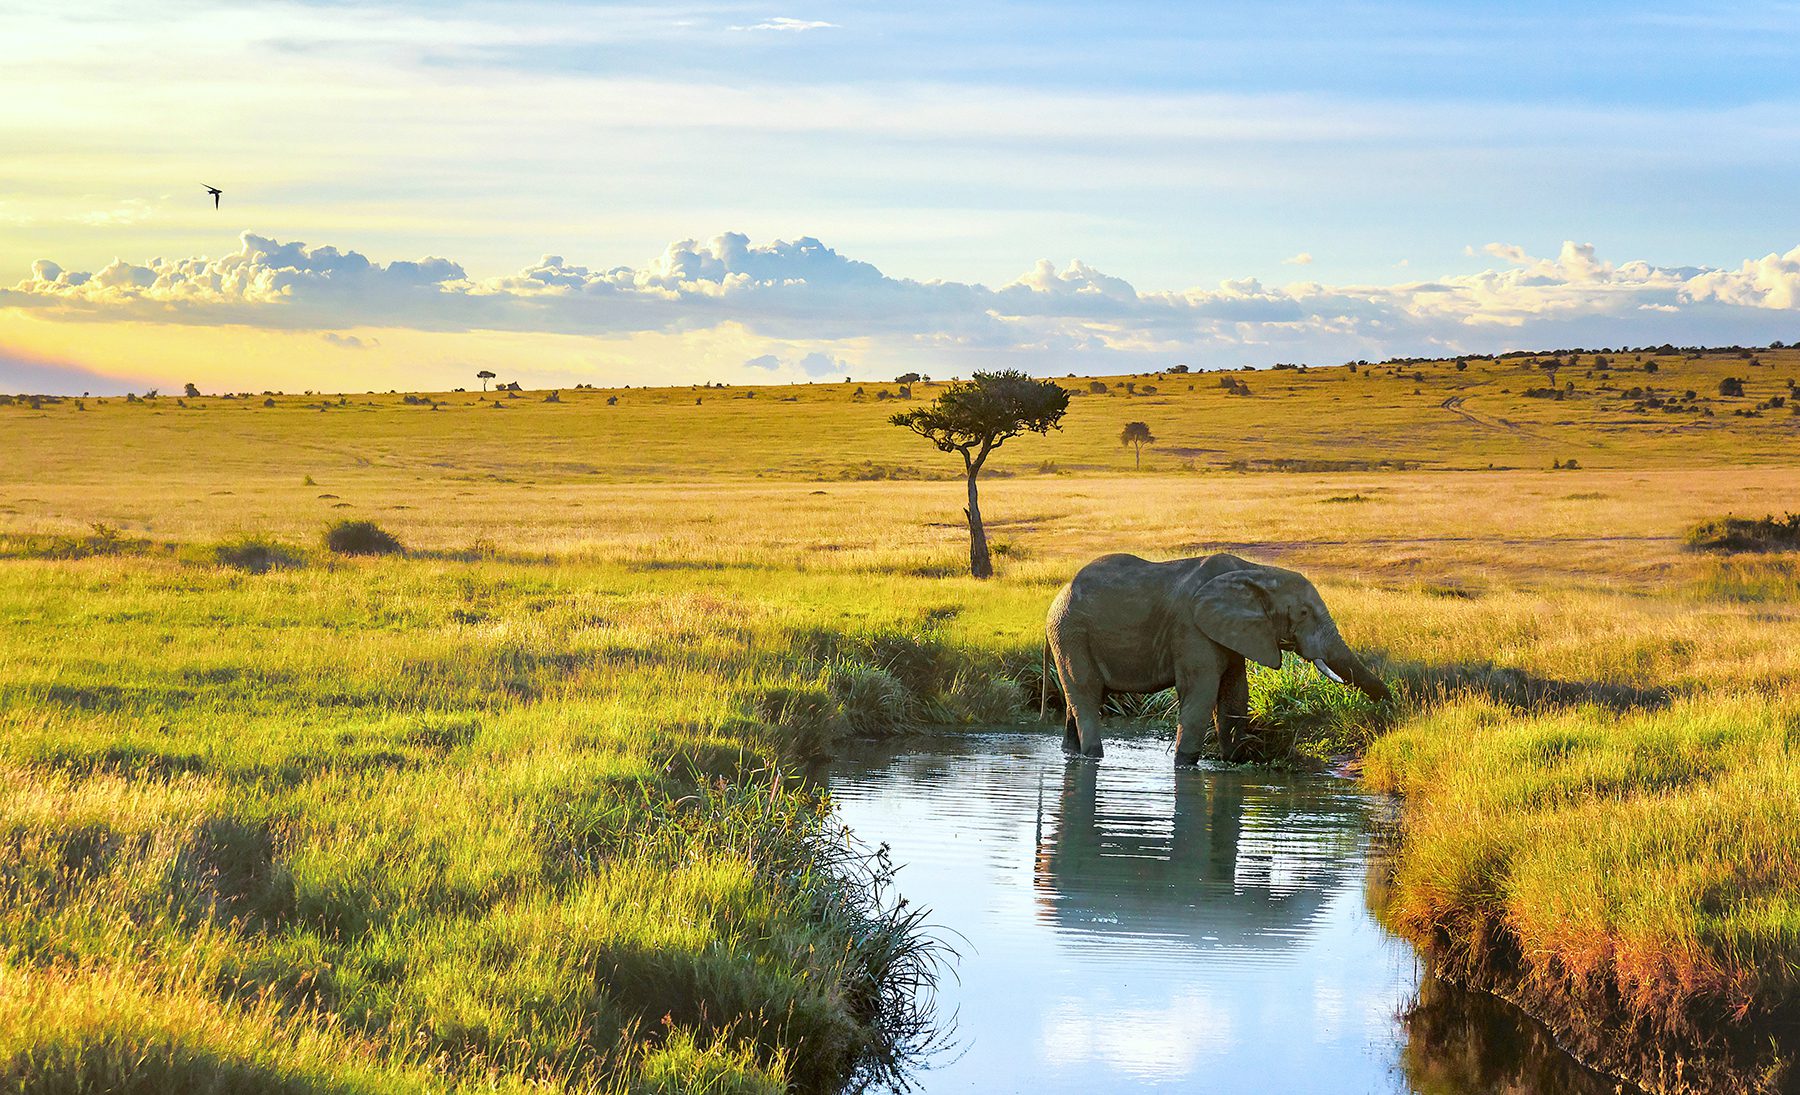 An elephant is drinking water from a small pond.